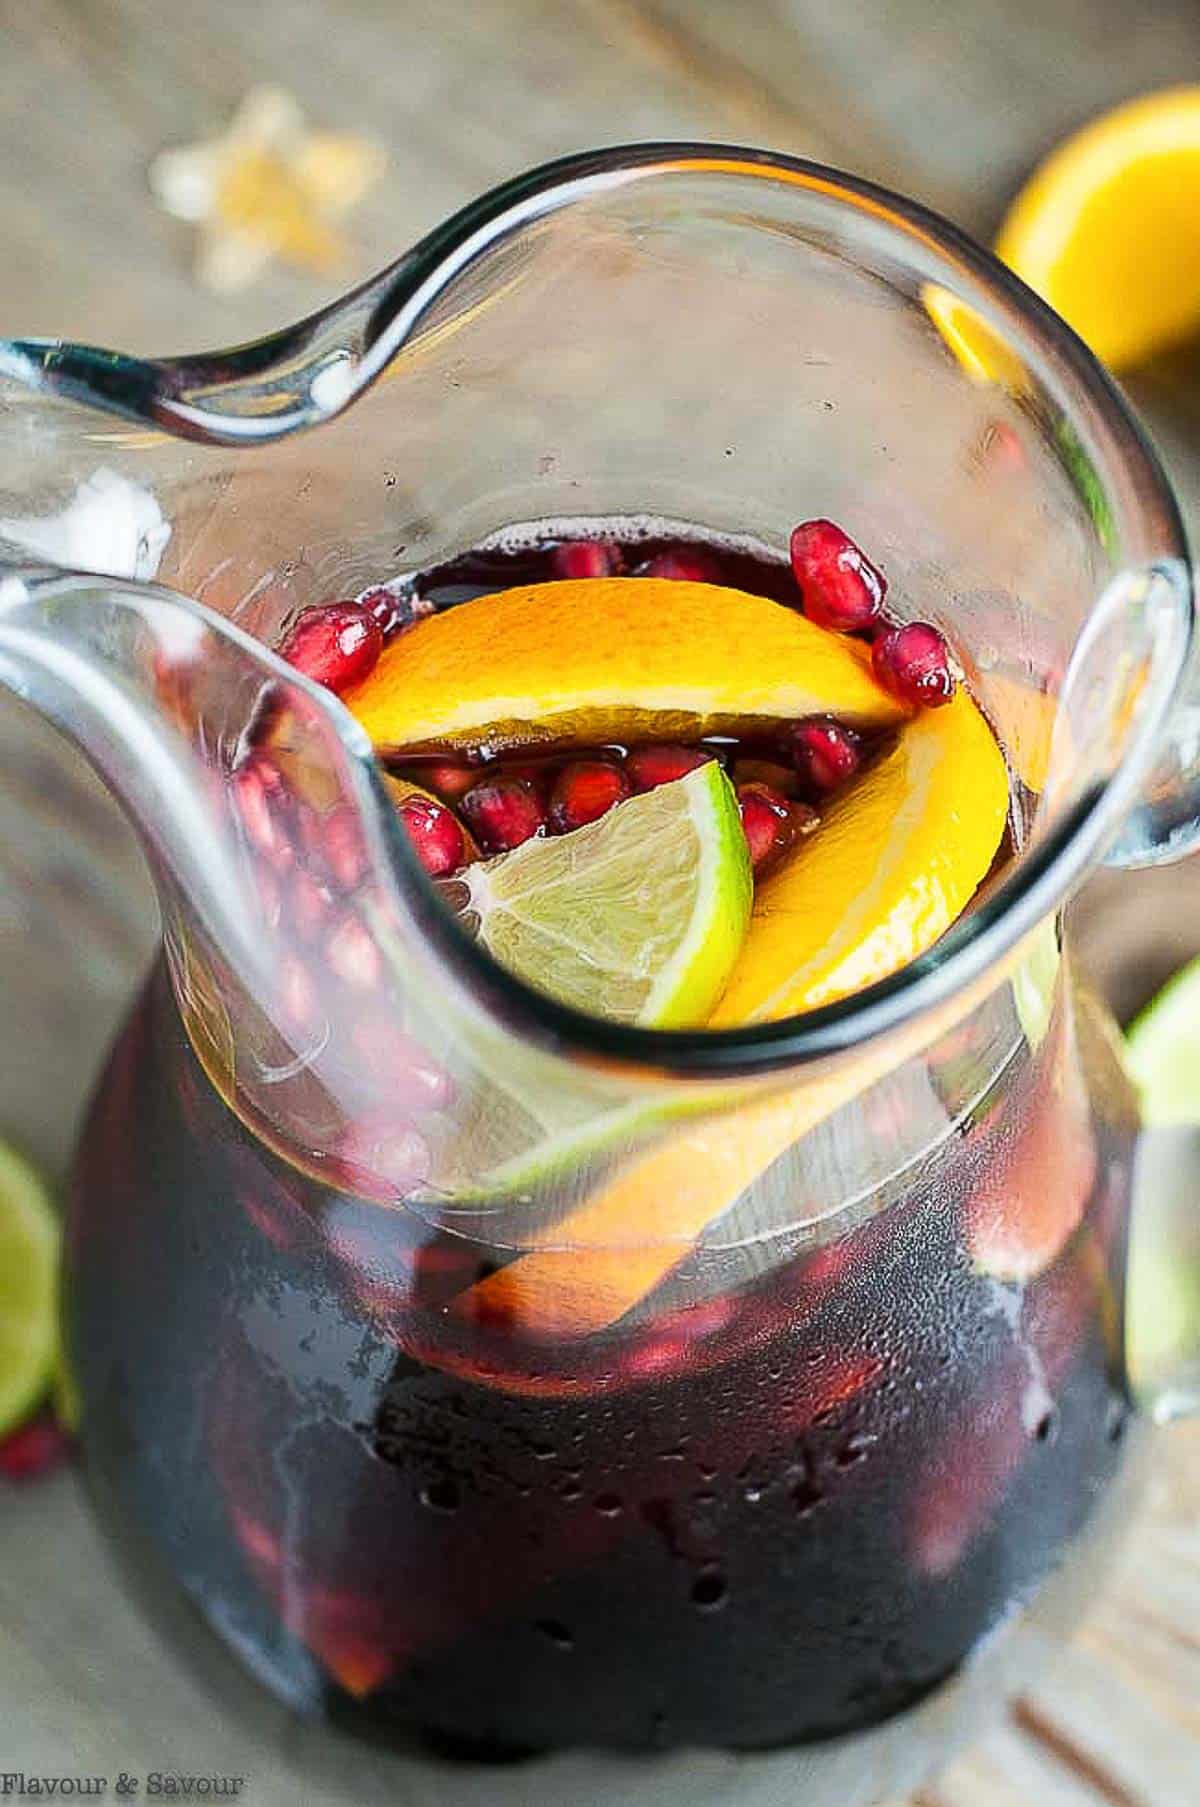 overhead view of a pitcher of pomegranate sangria with oranges, lemons and pomegranate arils